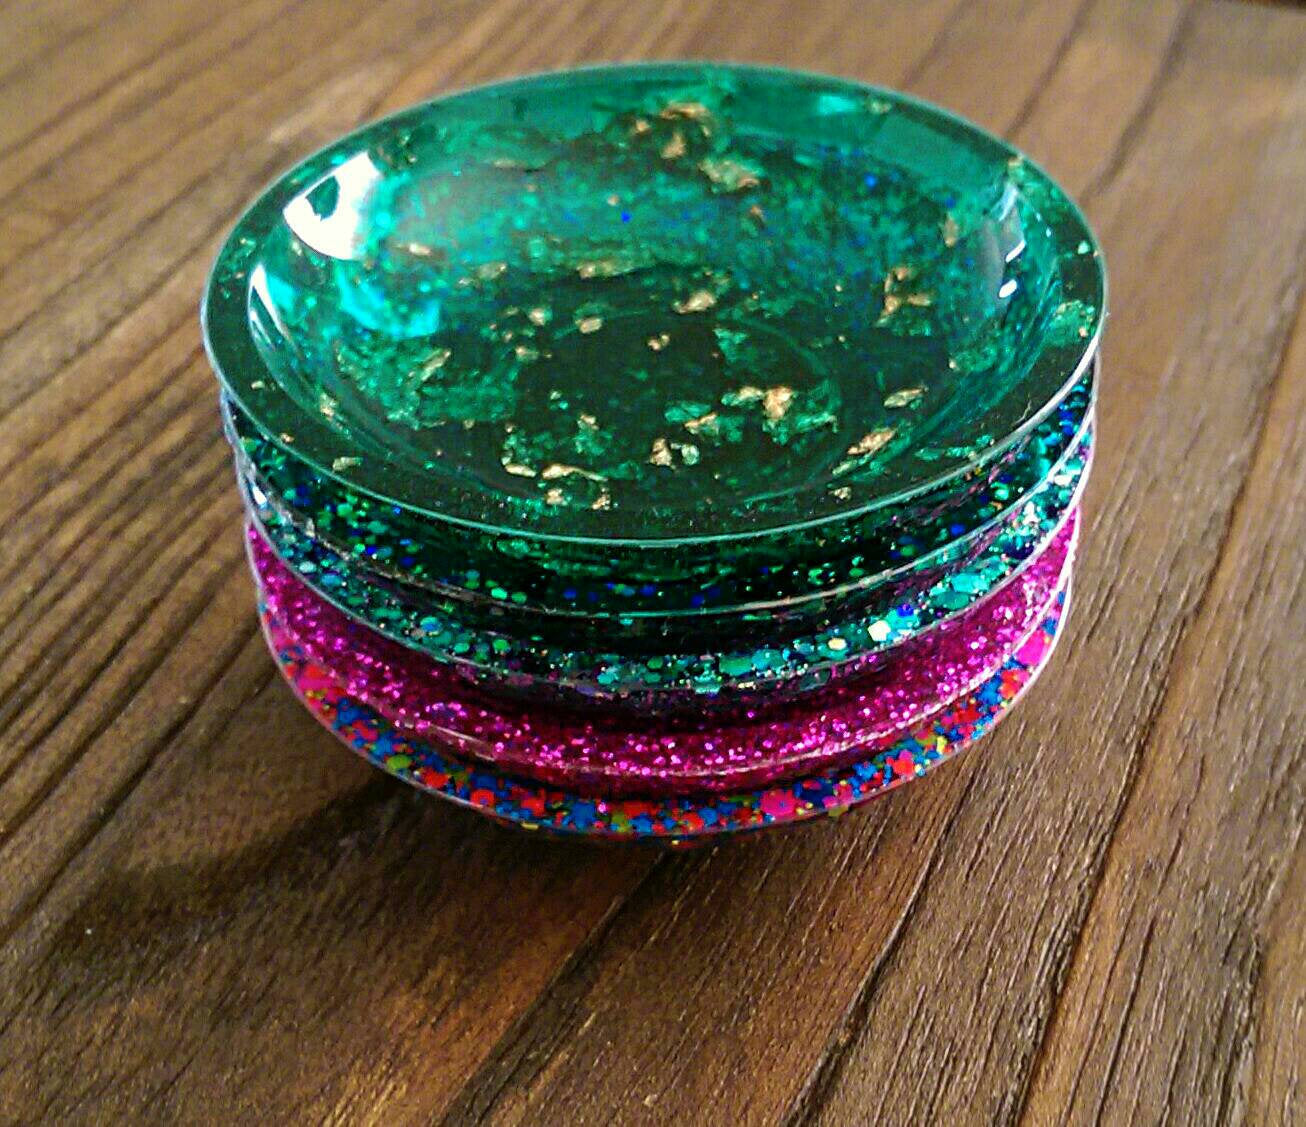 Ring Trinket Dish Turquoise Sparkly Glitter Mix Hand Made Resin Dish - Silver and Resin Designs